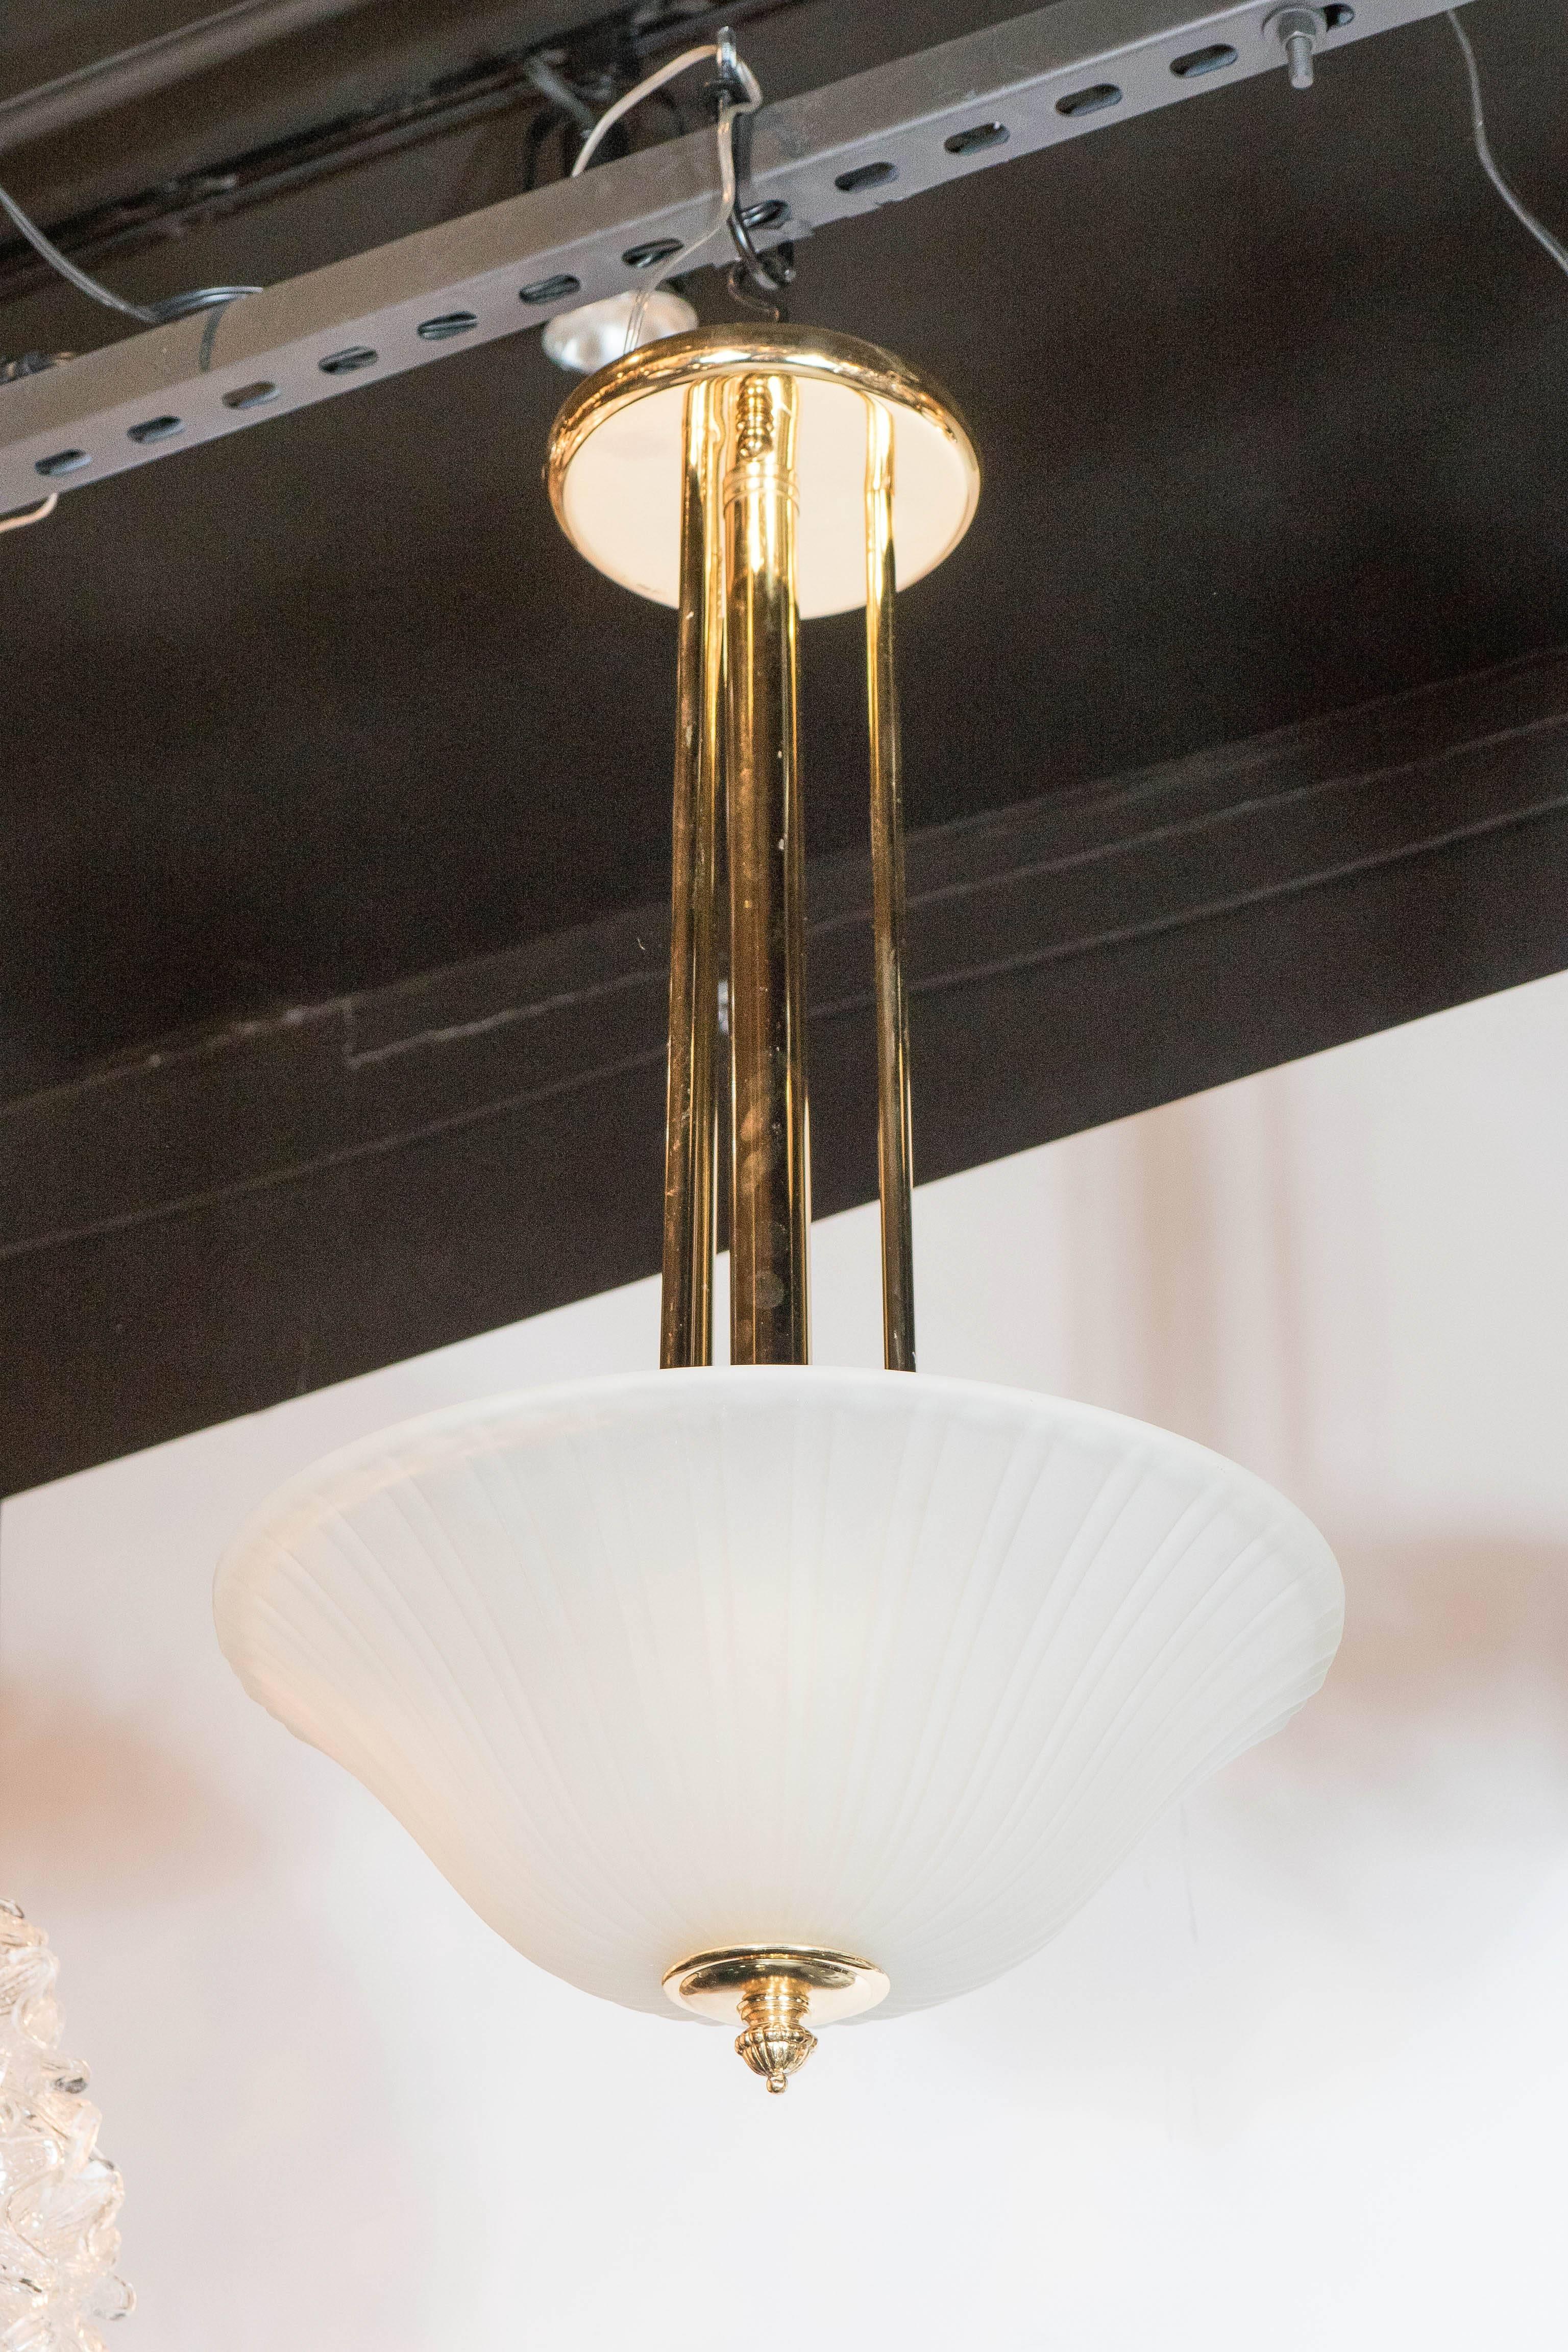 This elegant Art Deco pendant consists of a ribbed and fluted frosted glass dome supported by a detailed brass support, which connects to one wide and three supporting polished brass rods which connects to a flush mount cap. The clean lines on this